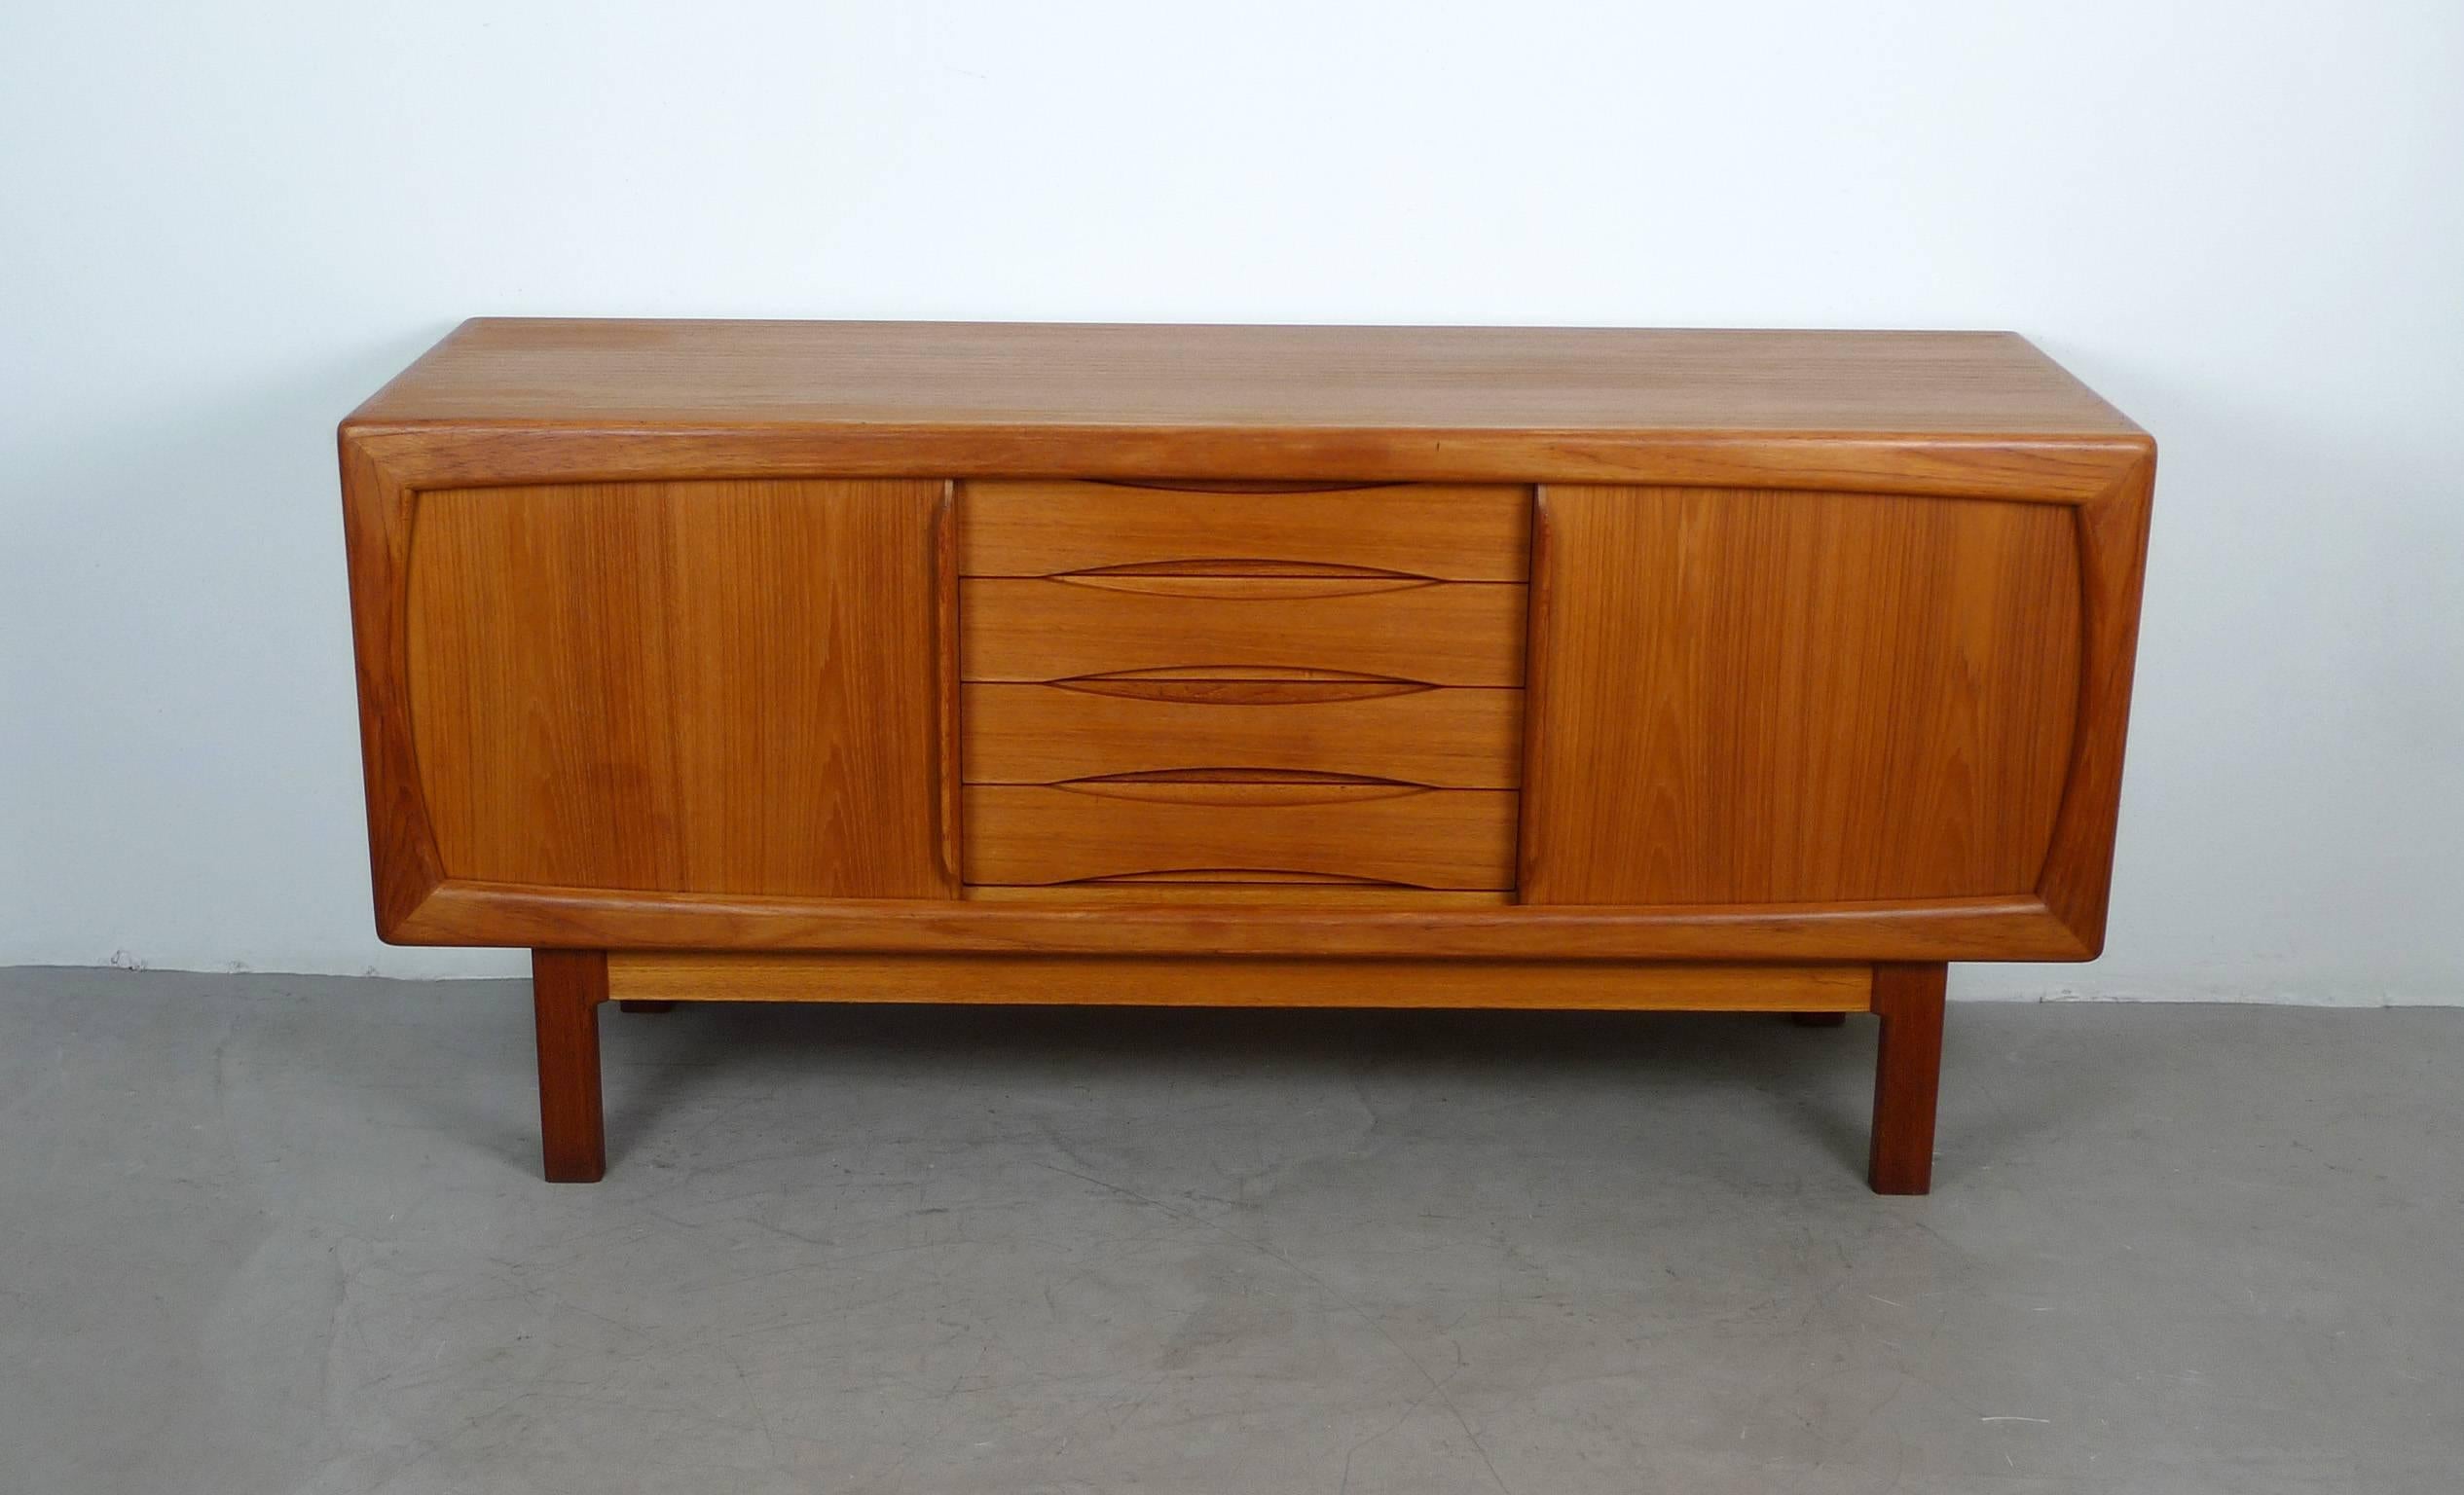 Teakwood sideboard with oval framed front, four drawers and two sliding doors from the 1960s. Behind each door is one board adjustable in height. Each drawer has an elegant recessed grip. The sideboard was produced by the Danish furniture maker